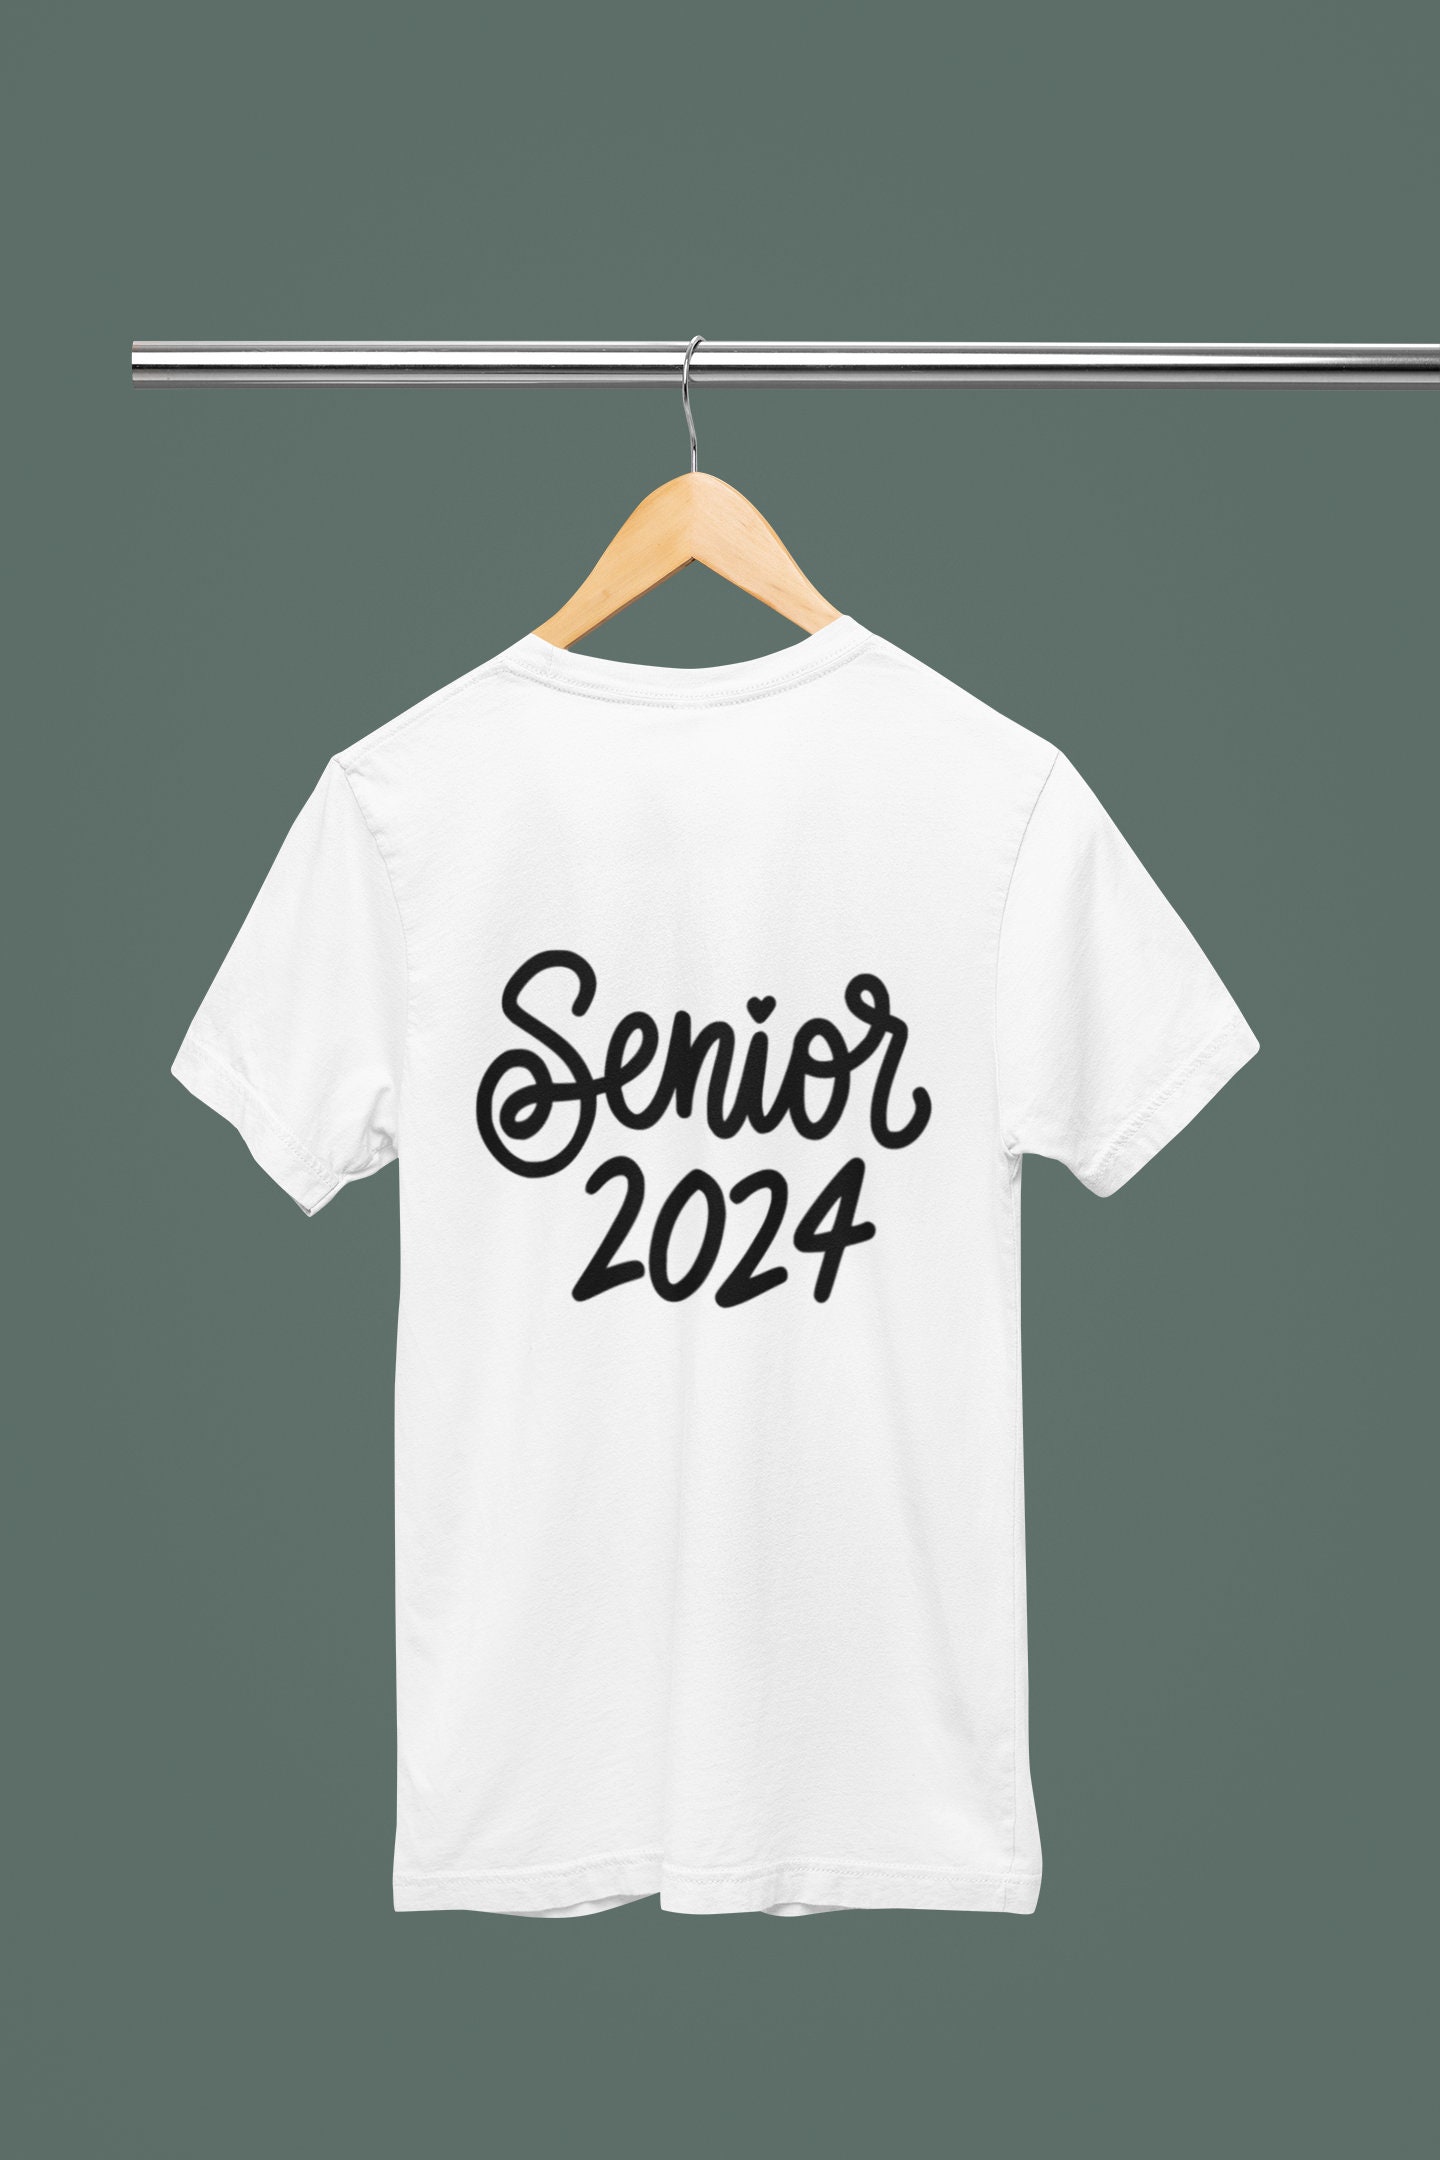  Class of 2024 Iron On Decal, Senior Class Shirt Patch, Heat  Transfer, HTV Graphic TShirt Sticker, DIY Crafts, Pick Size Color, Iron-On  Almost Anything in 5 Min (Yellow) : Handmade Products